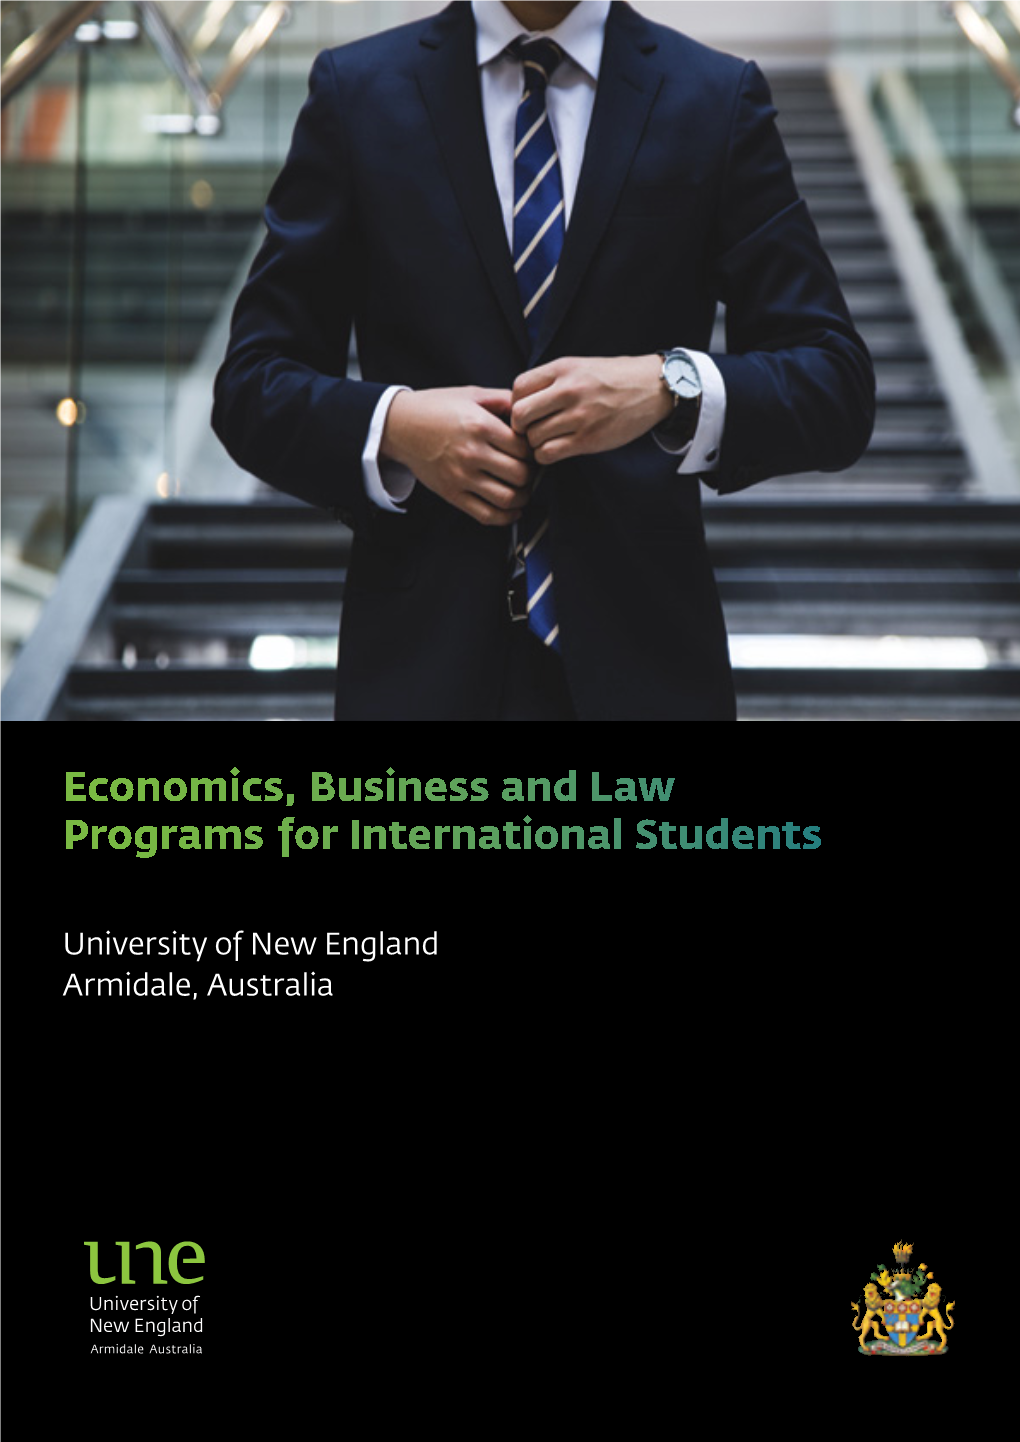 Economics, Business and Law Programs for International Students